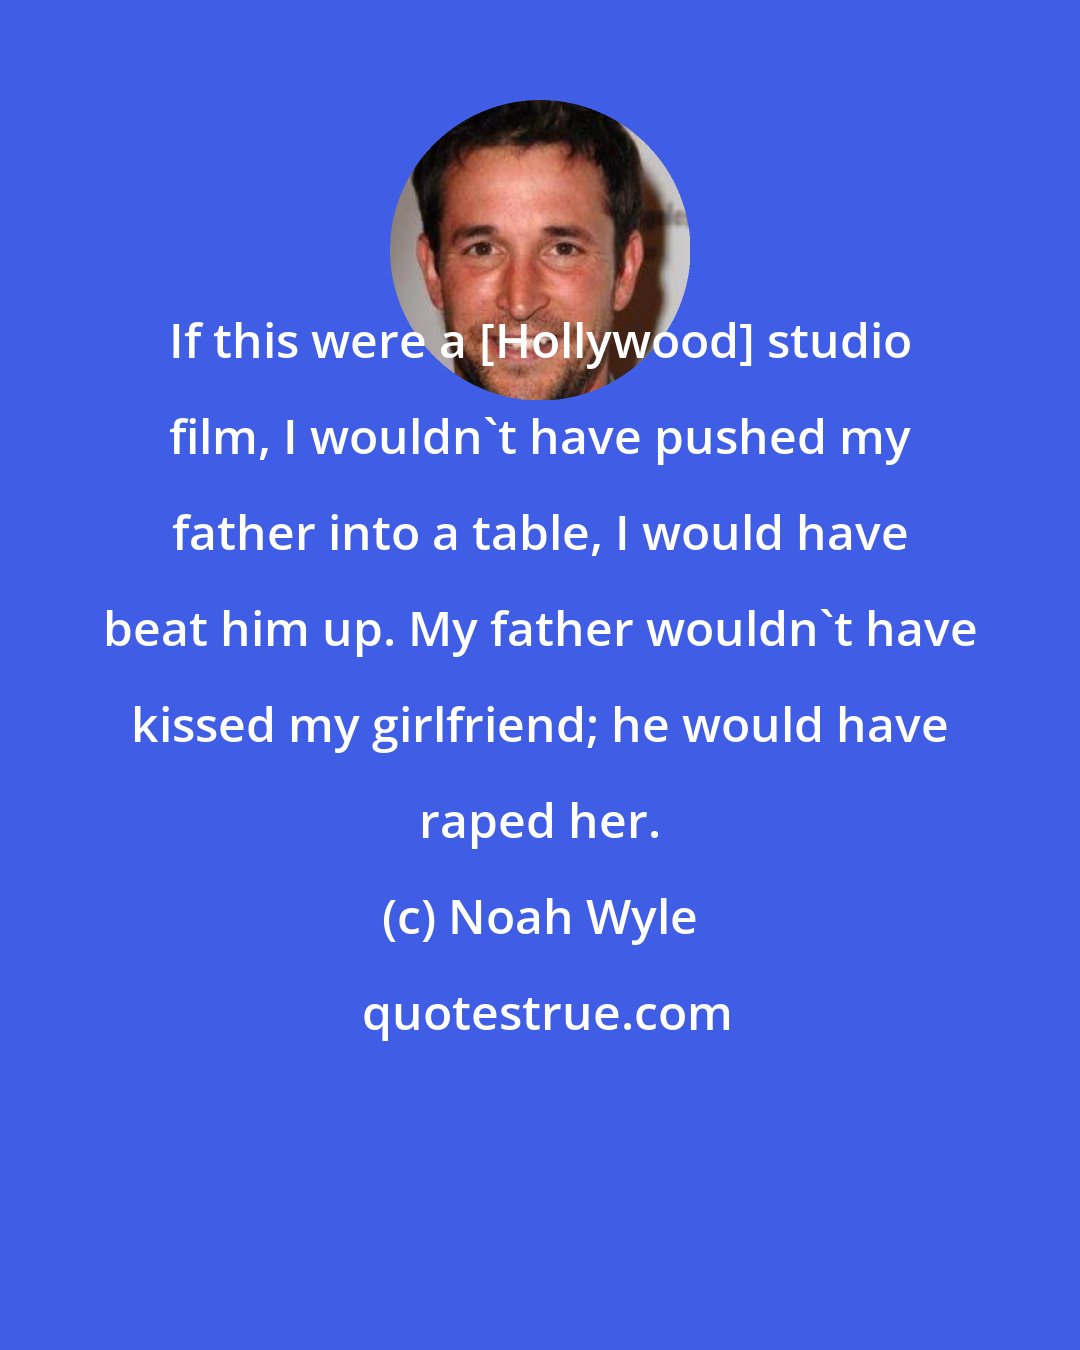 Noah Wyle: If this were a [Hollywood] studio film, I wouldn't have pushed my father into a table, I would have beat him up. My father wouldn't have kissed my girlfriend; he would have raped her.